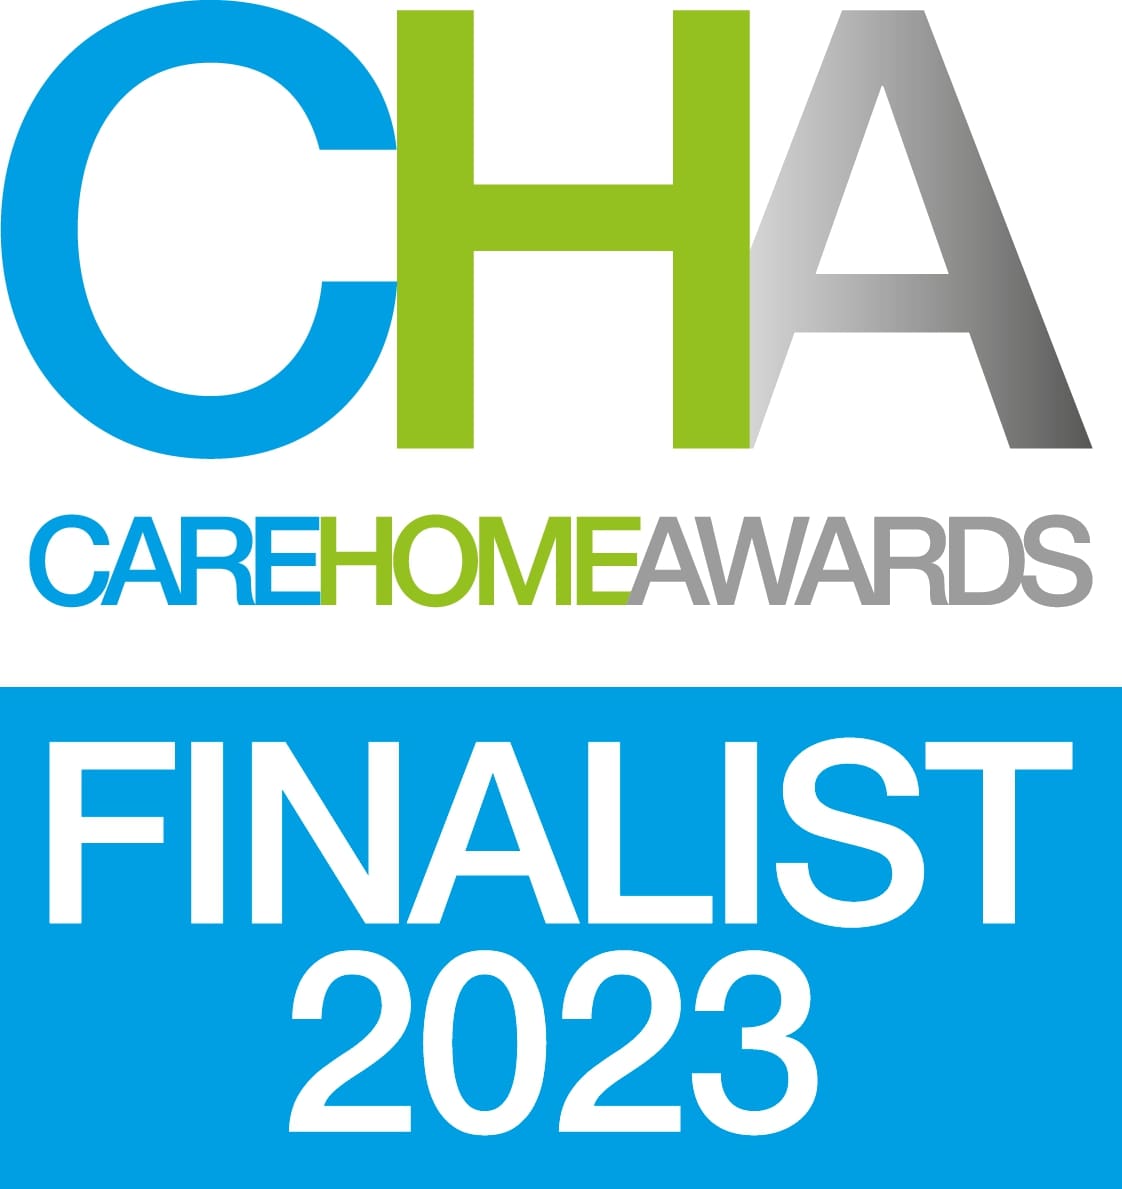 Care Home Awards 2023 Finalist - Best for Architecture or Interior Design 